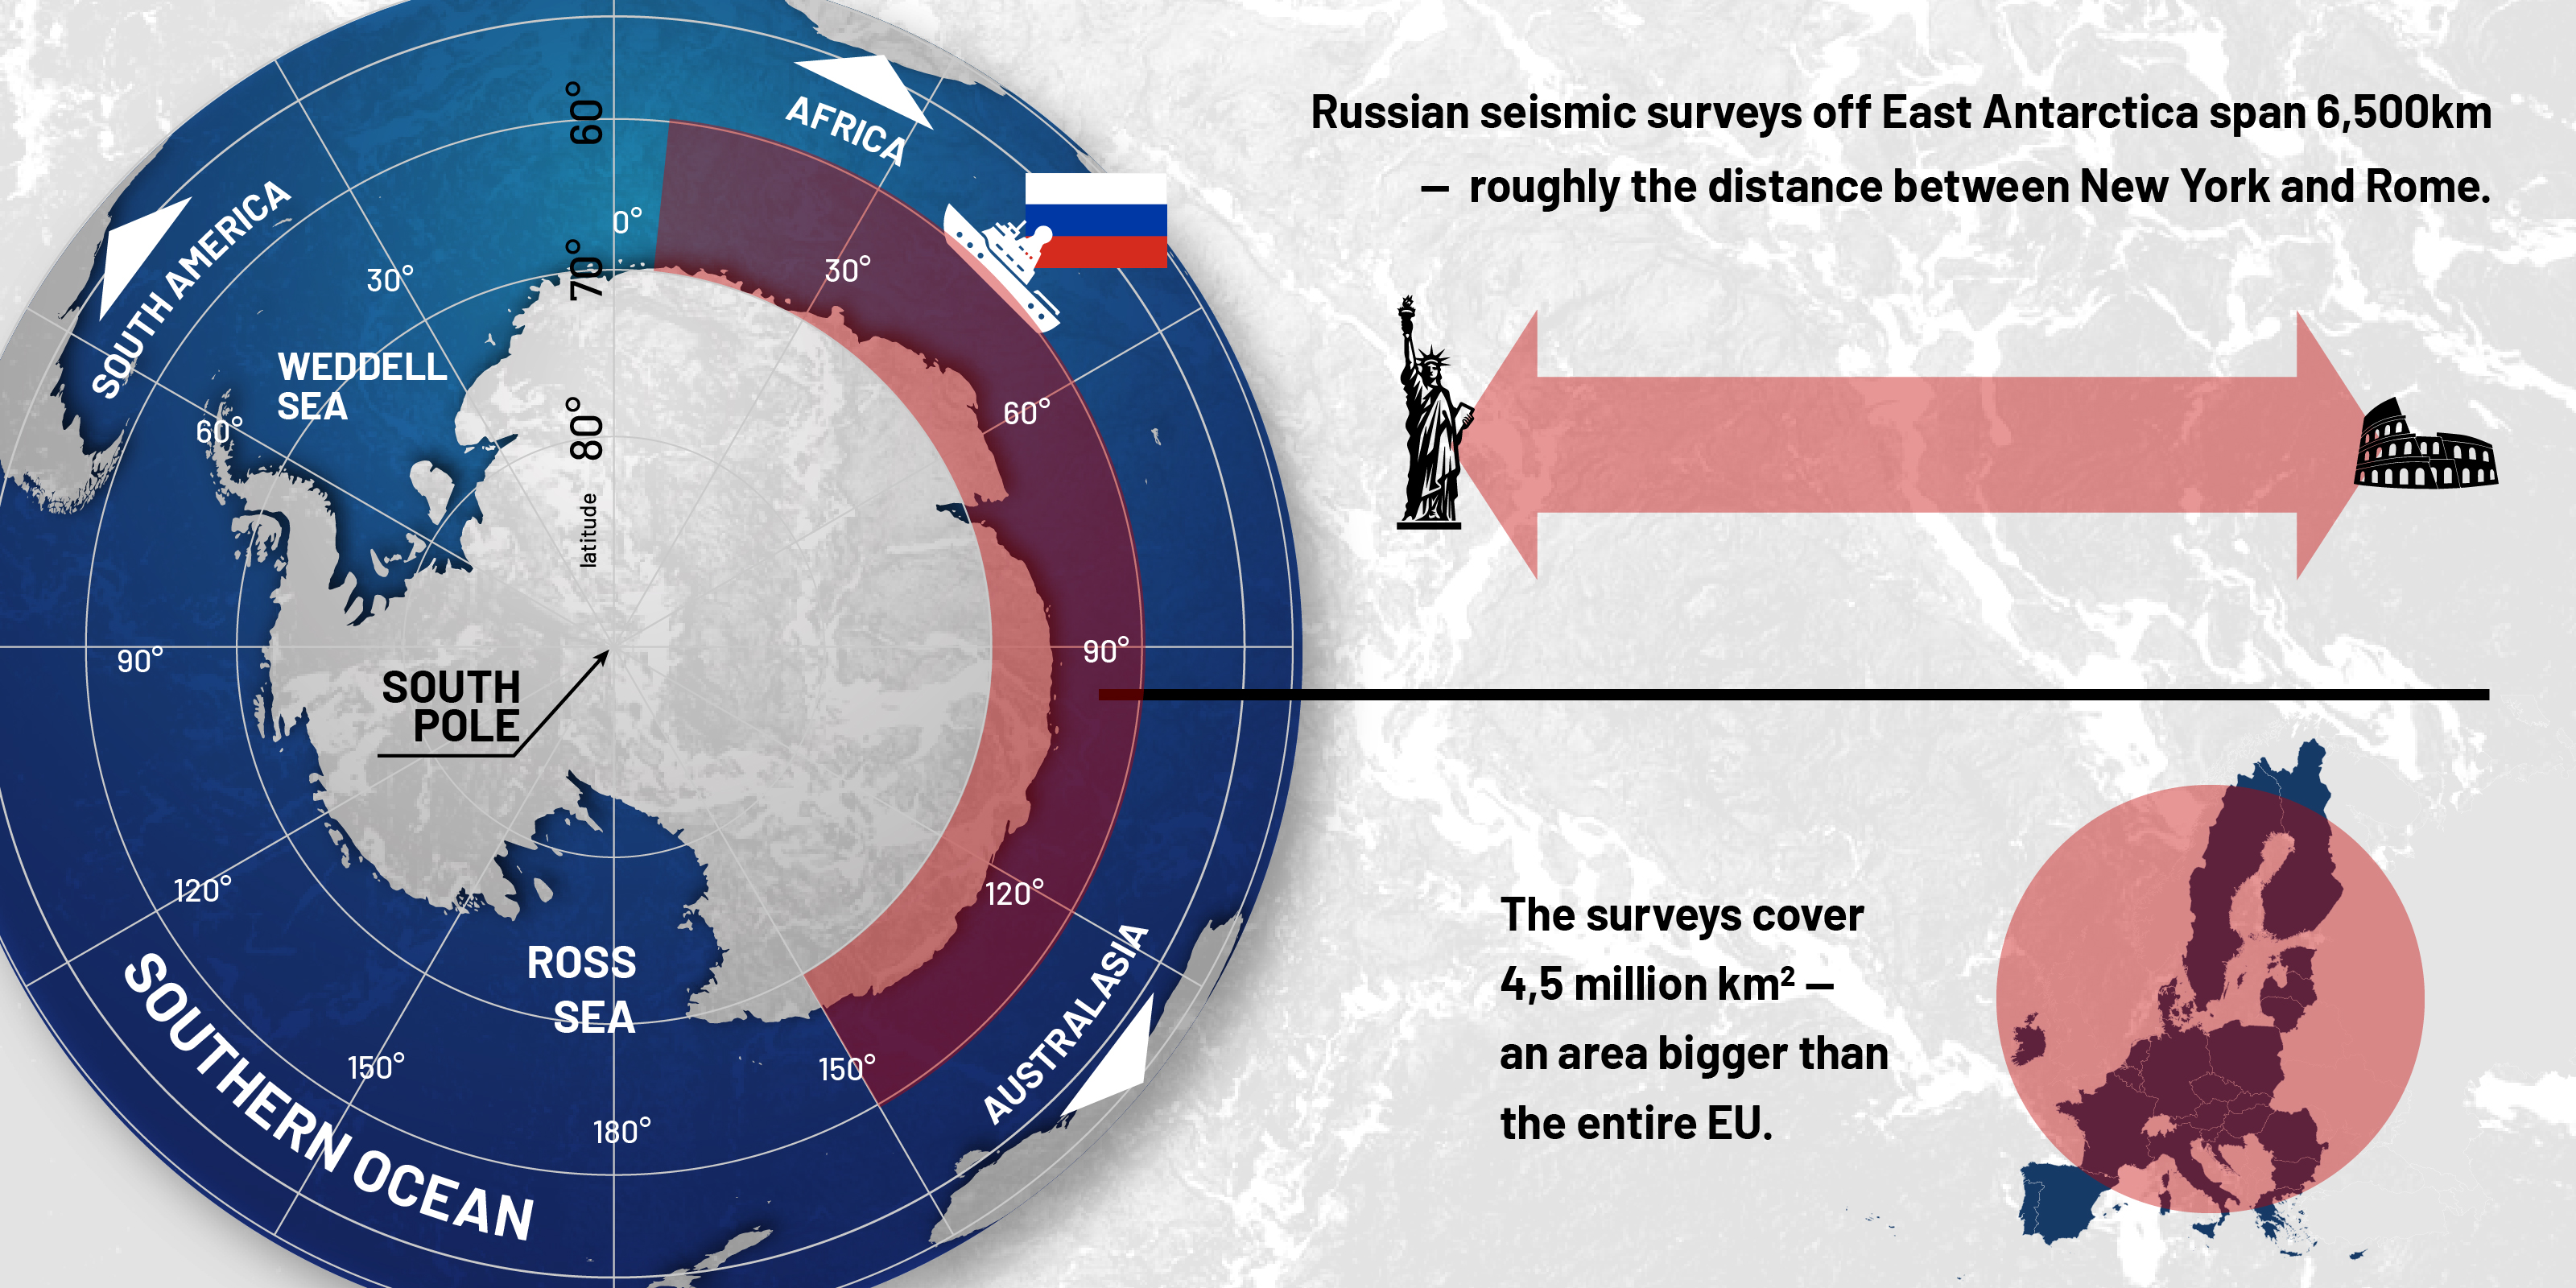 The vast extent of Russian oil and gas seismic surveys in the Antarctic